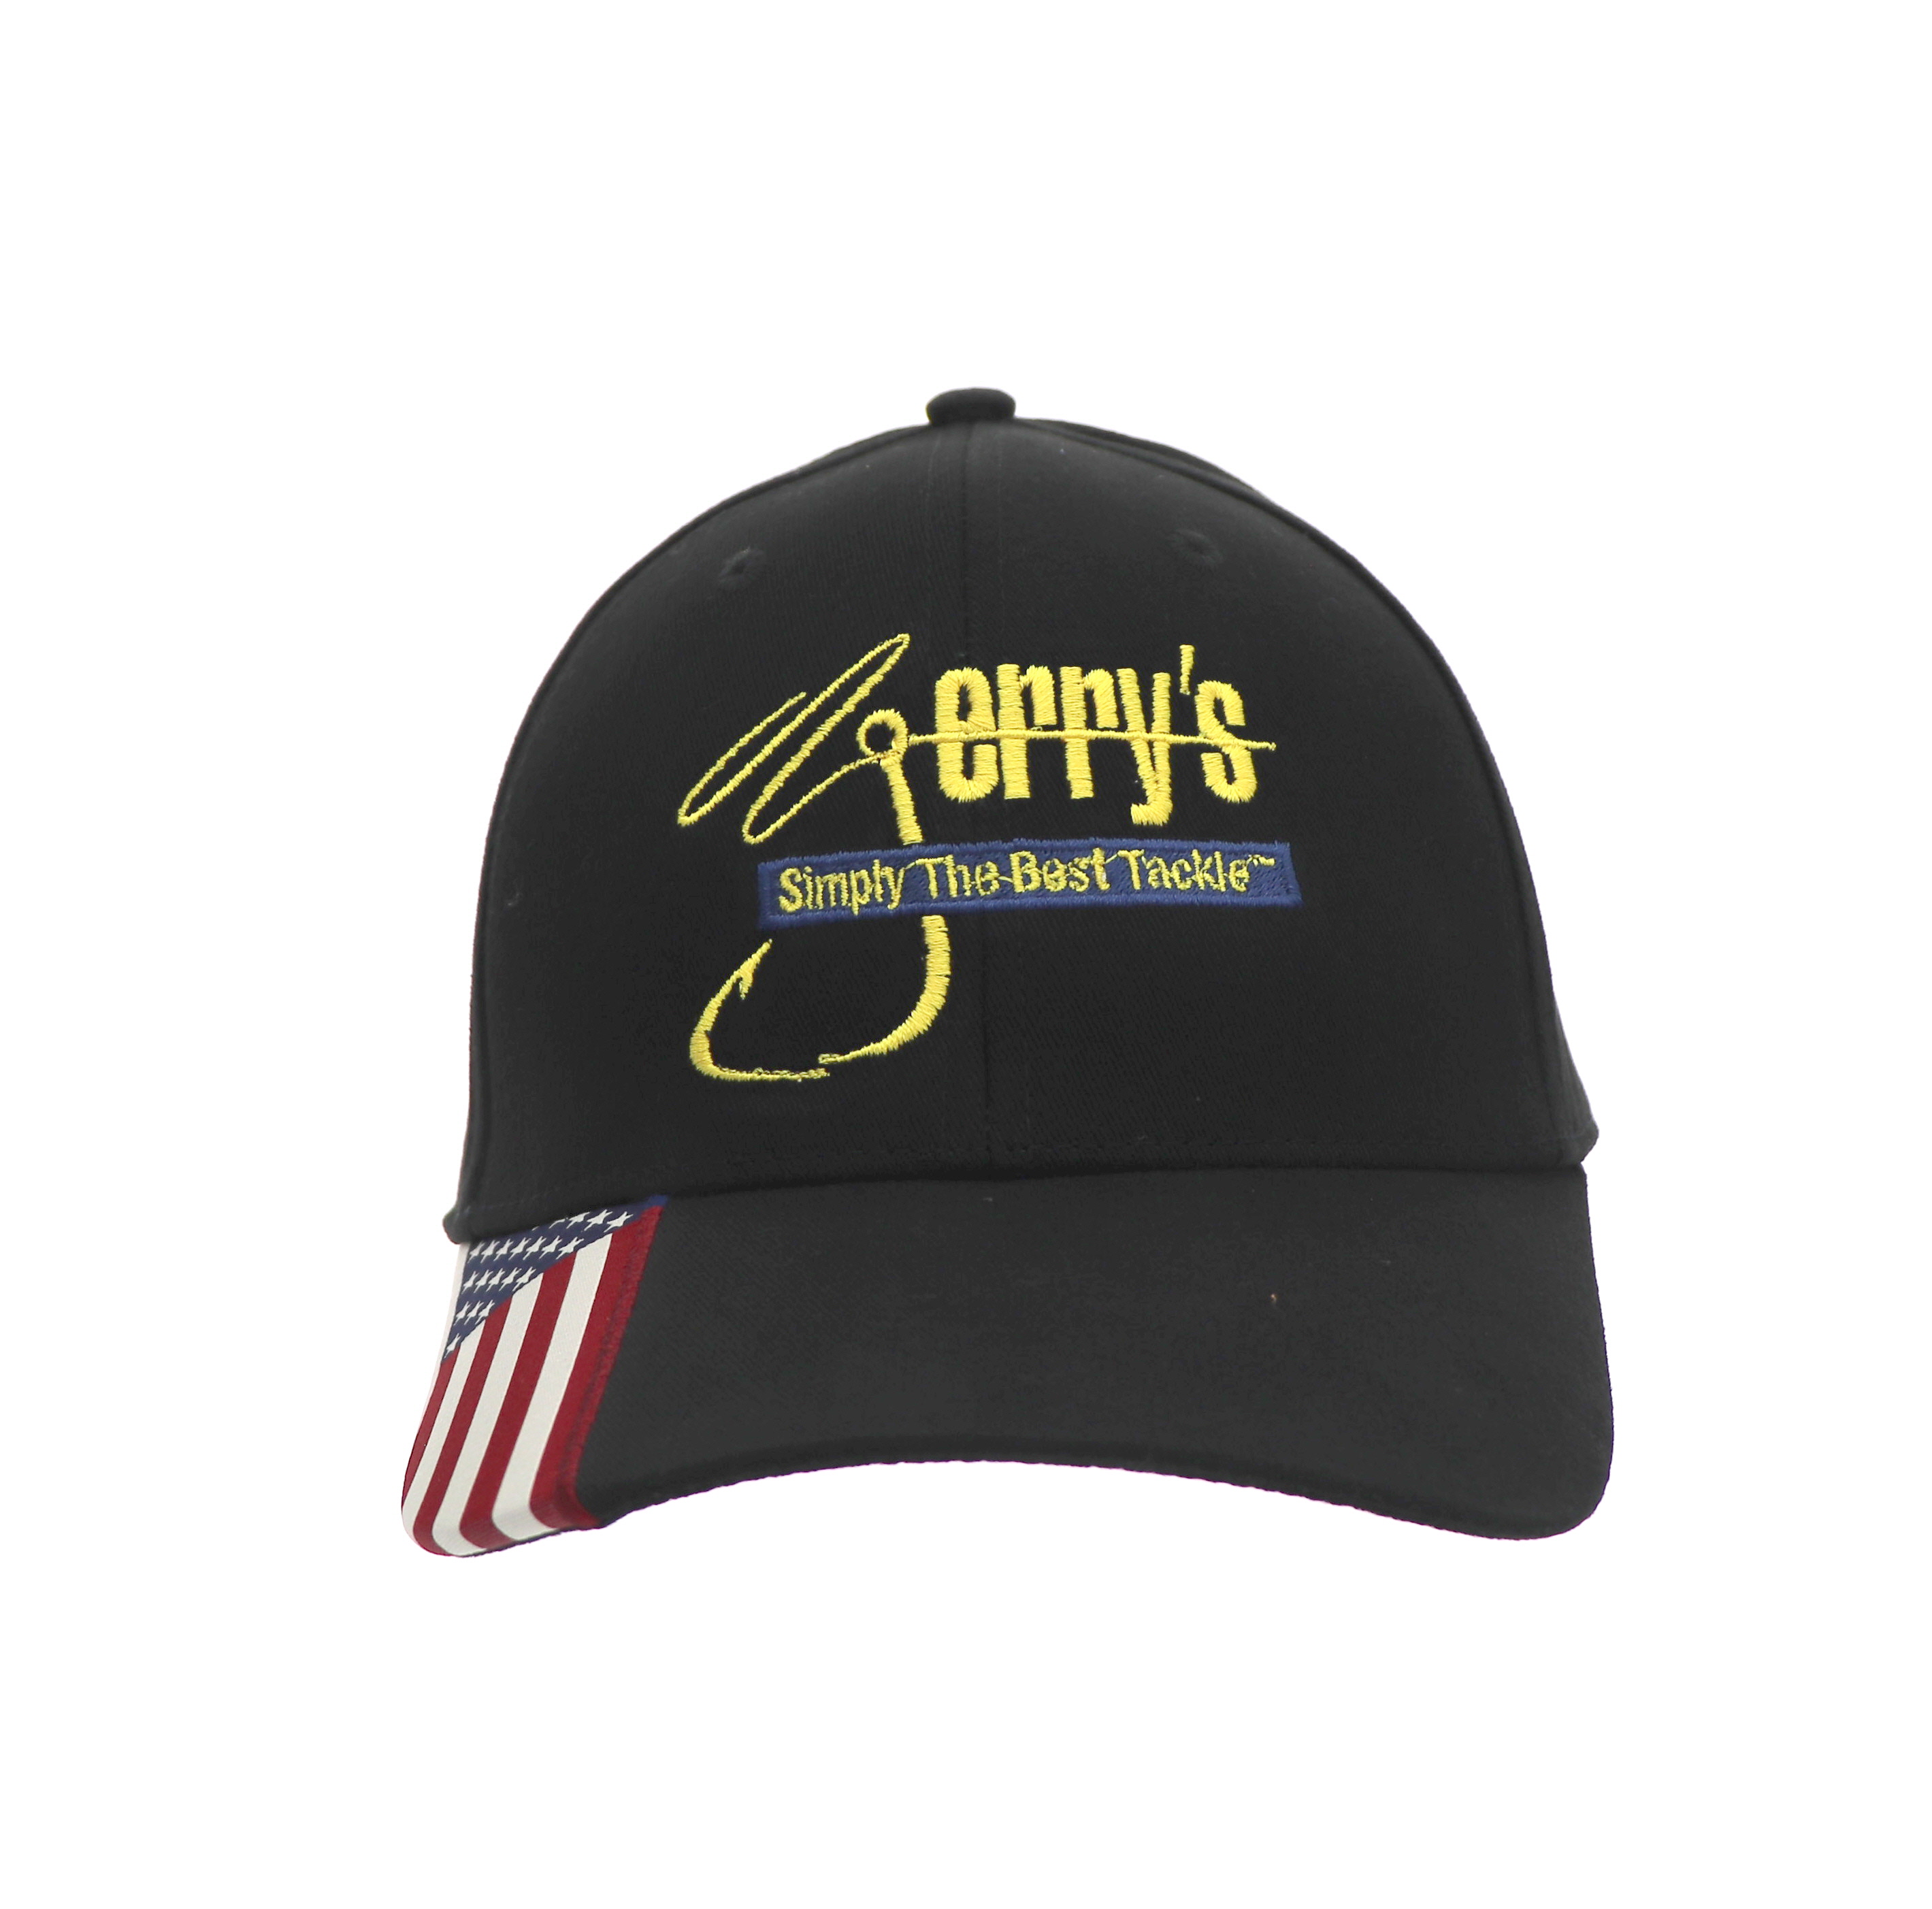 Jerry's Lures Hats - Dry Creek Outfitters